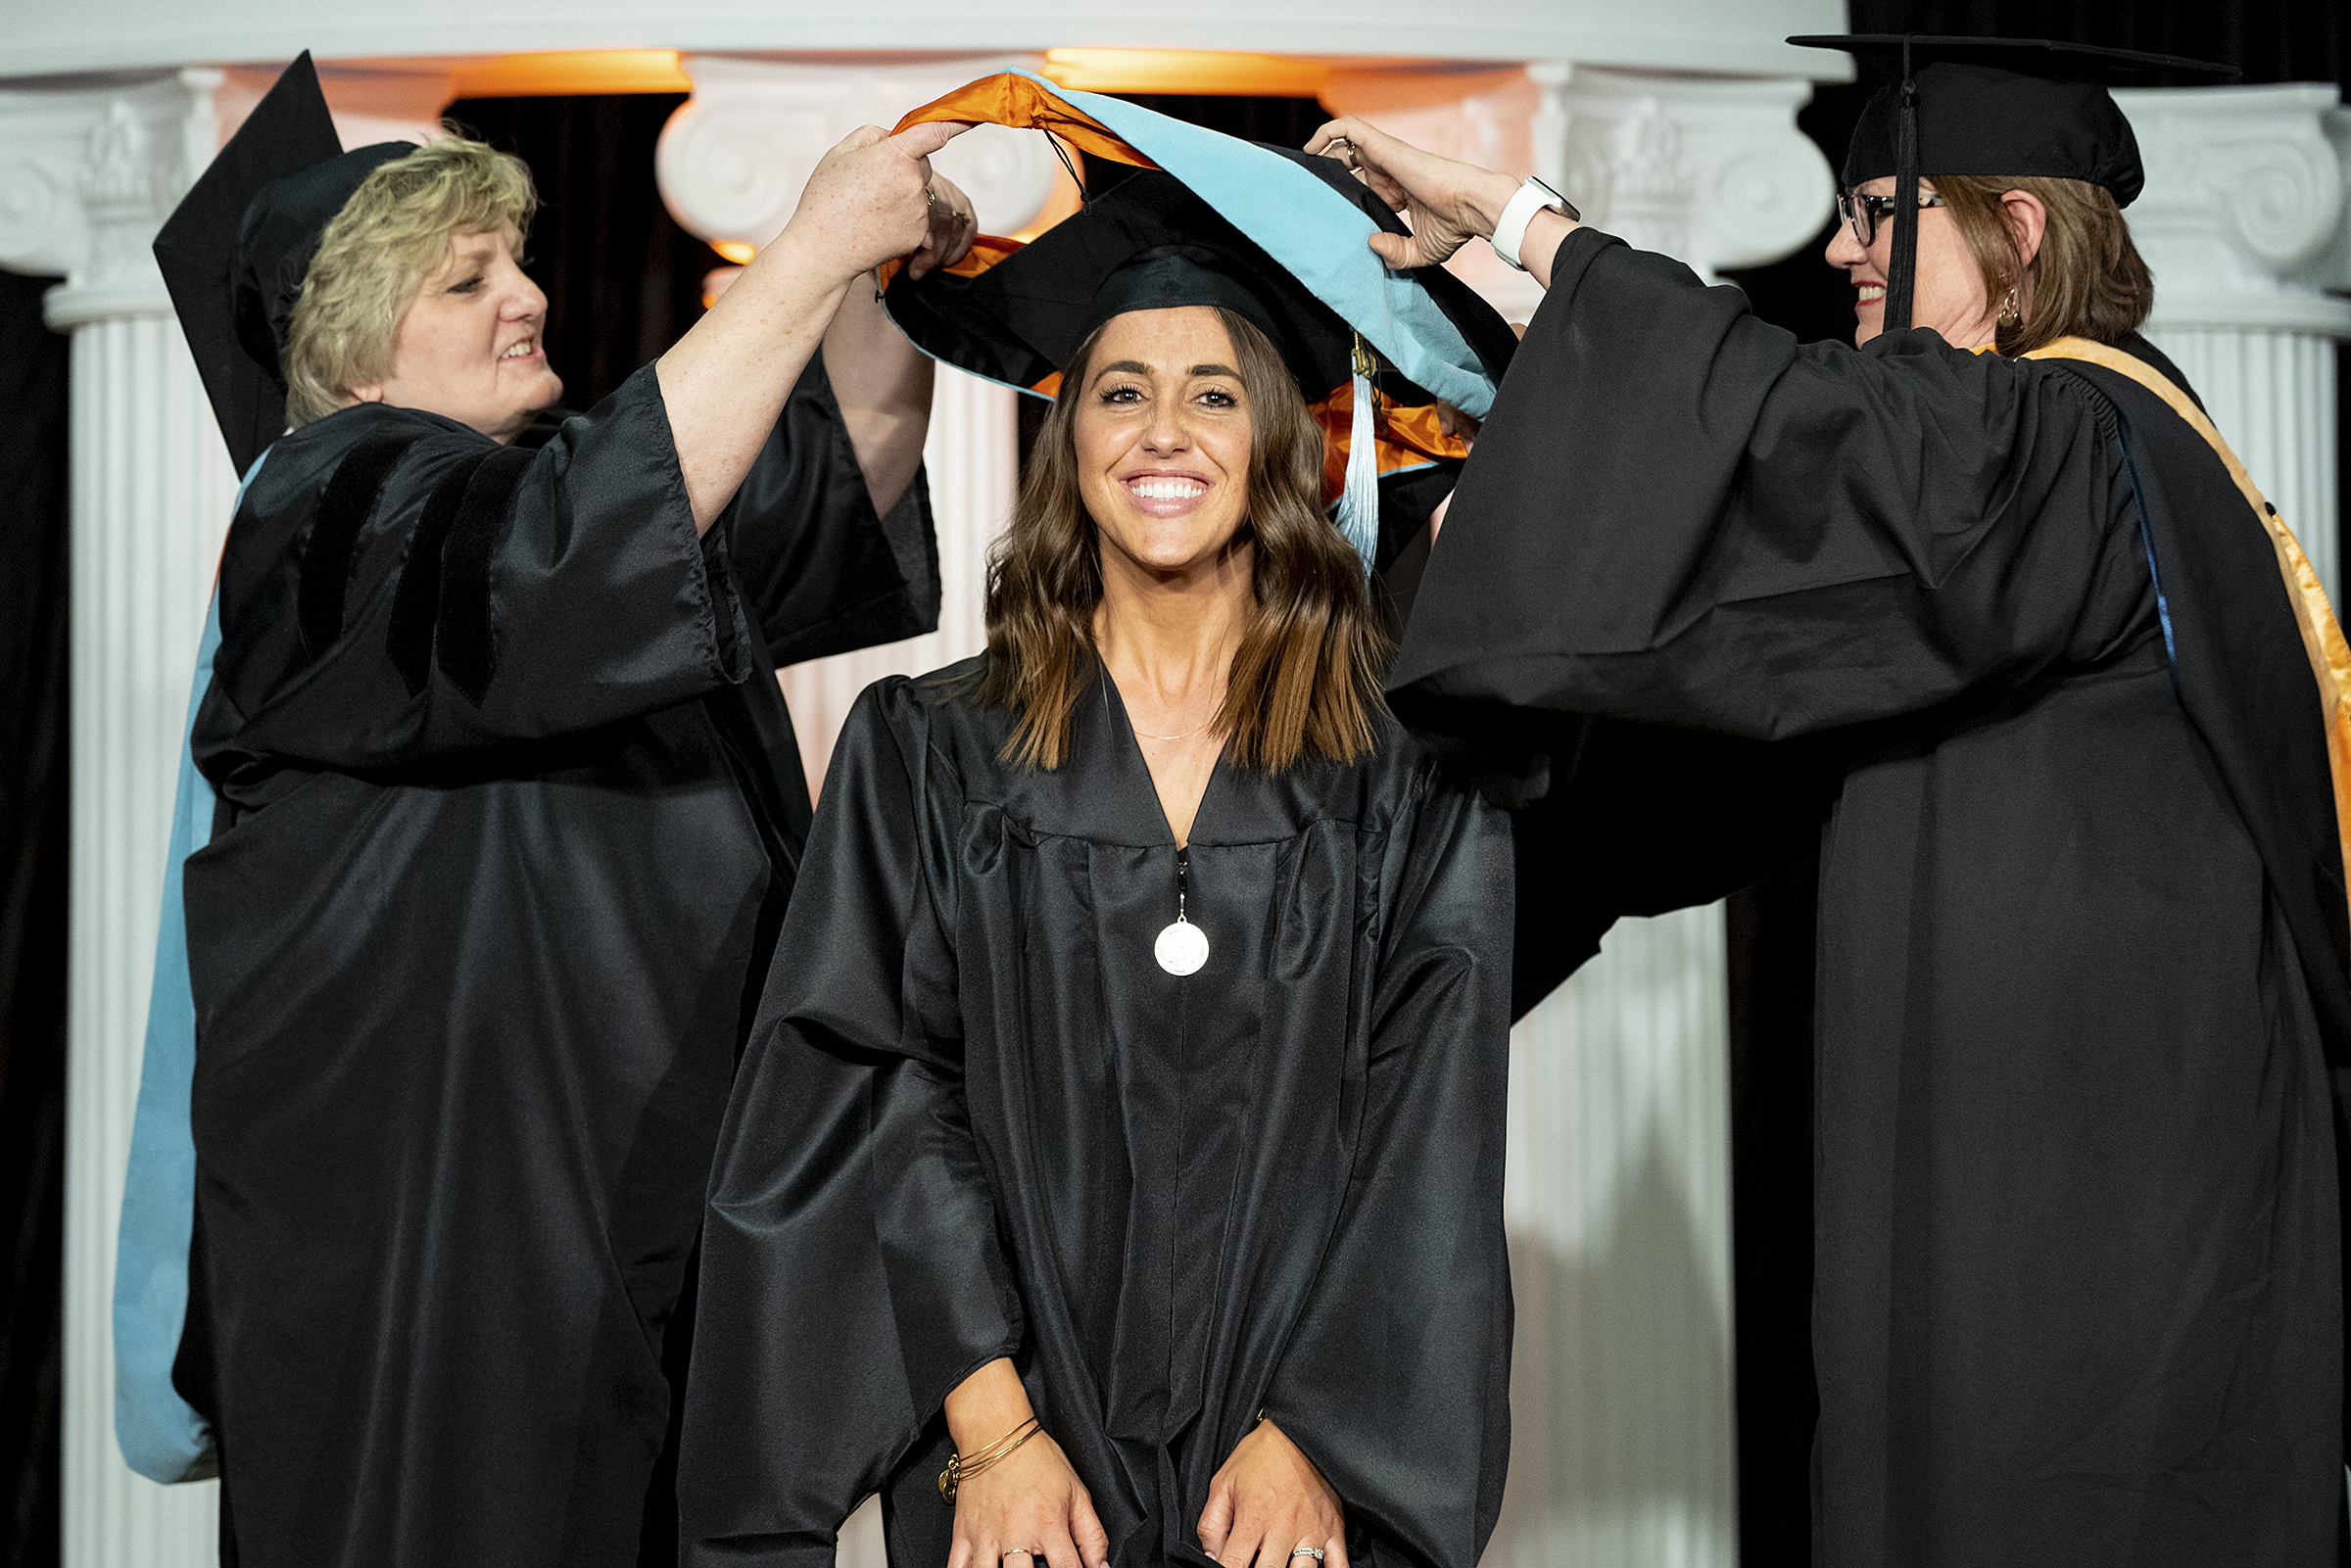 woman being hooded at hooding ceremony